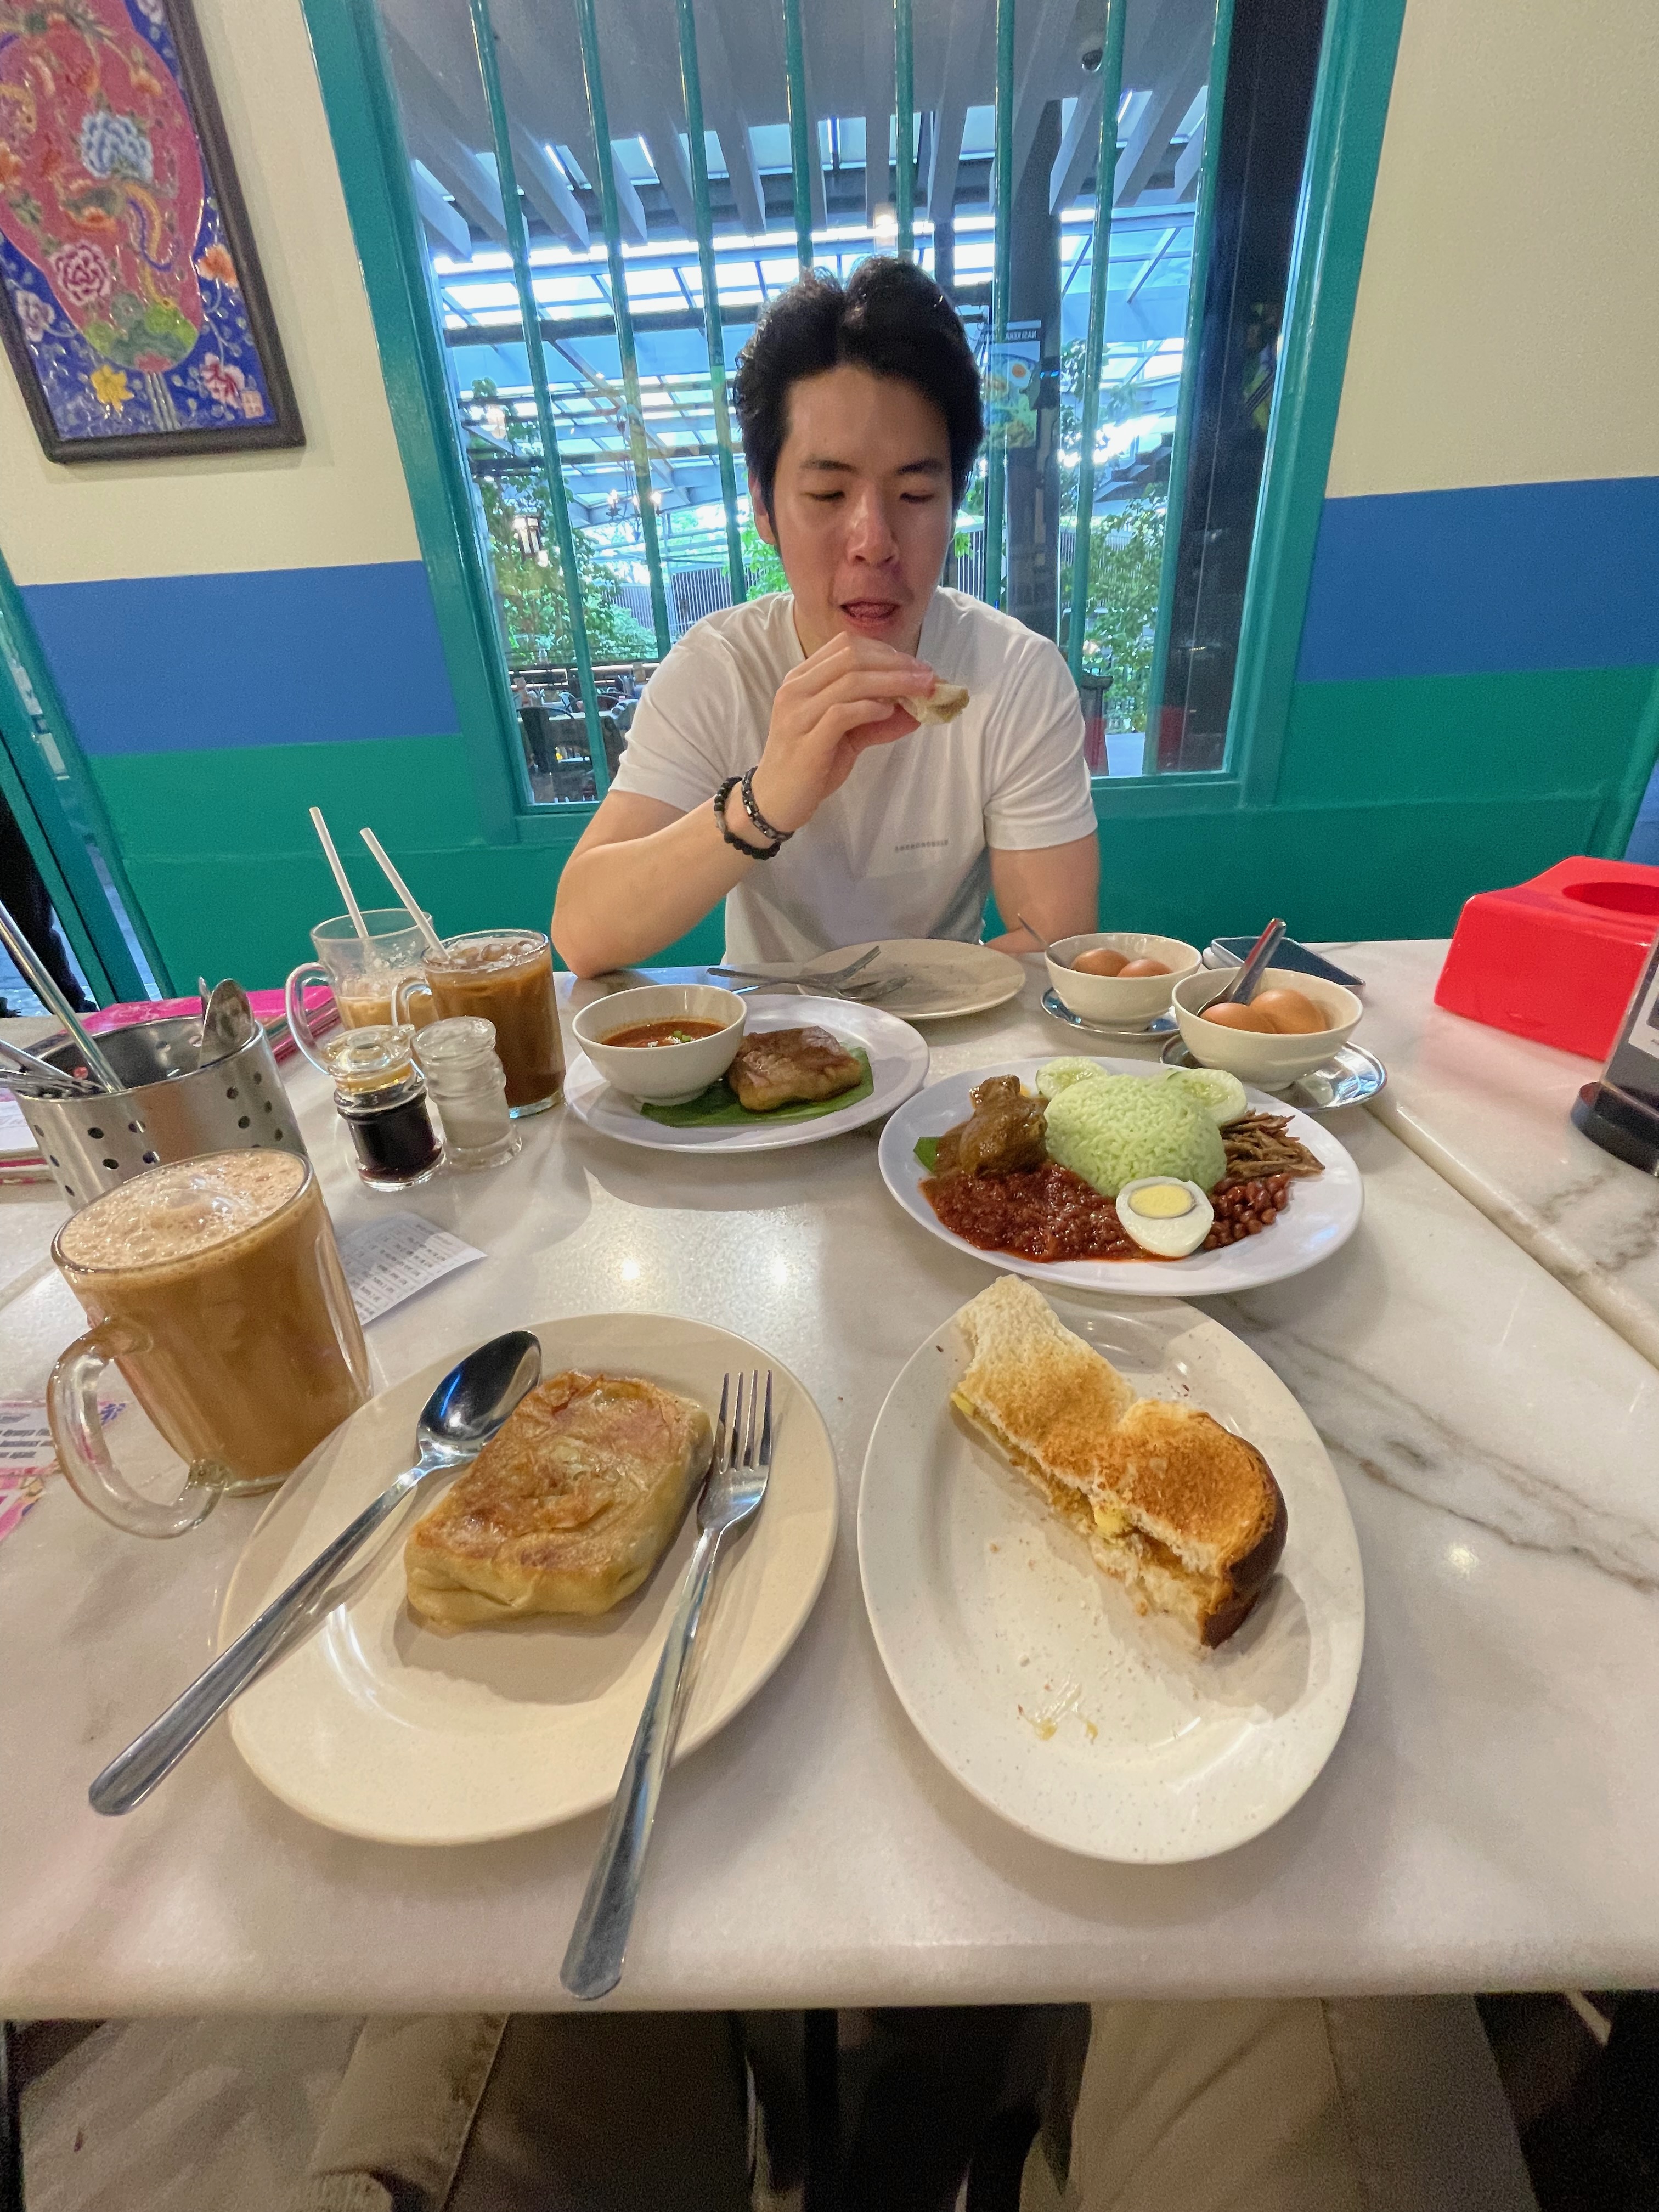 Bryan took me out to get some authentic Malay breakfast